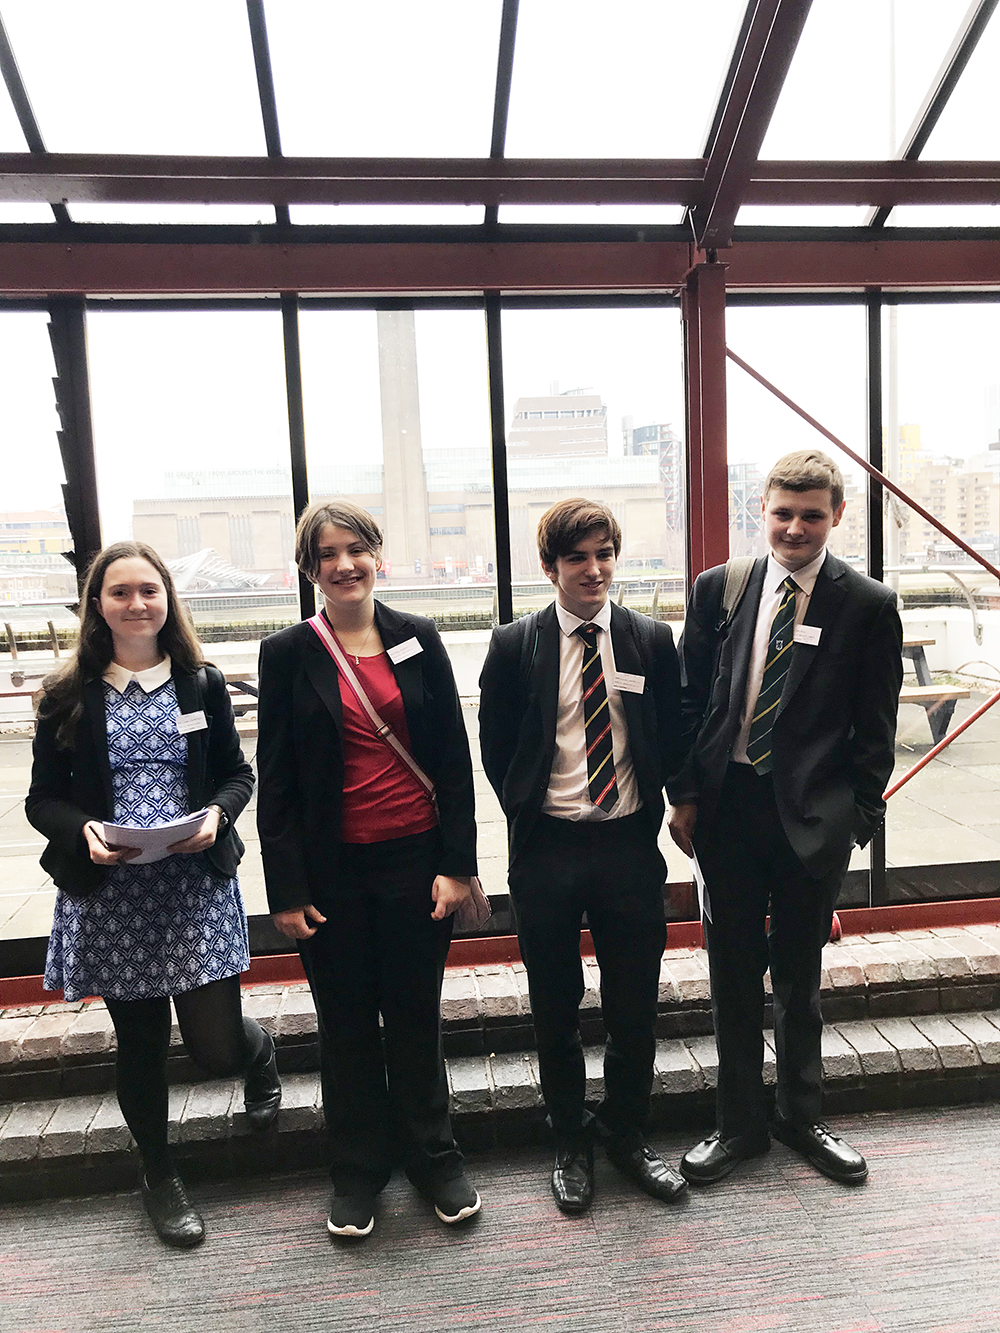 St Benedict's School attended a Model United Nations Conference